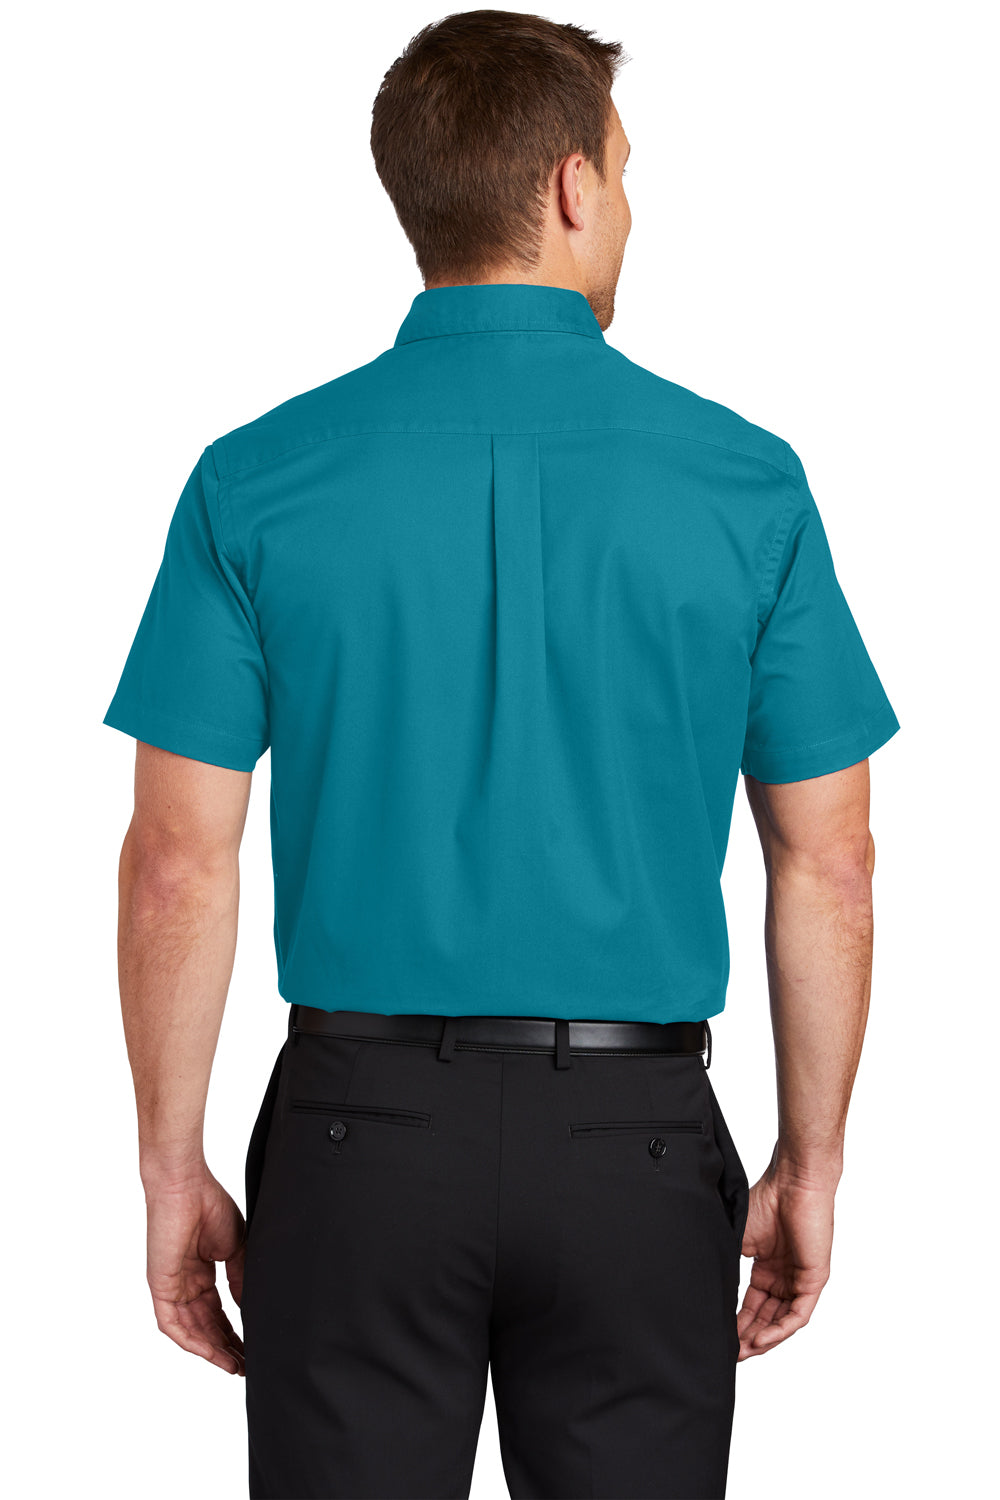 Port Authority S508/TLS508 Mens Easy Care Wrinkle Resistant Short Sleeve Button Down Shirt w/ Pocket Teal Green Back